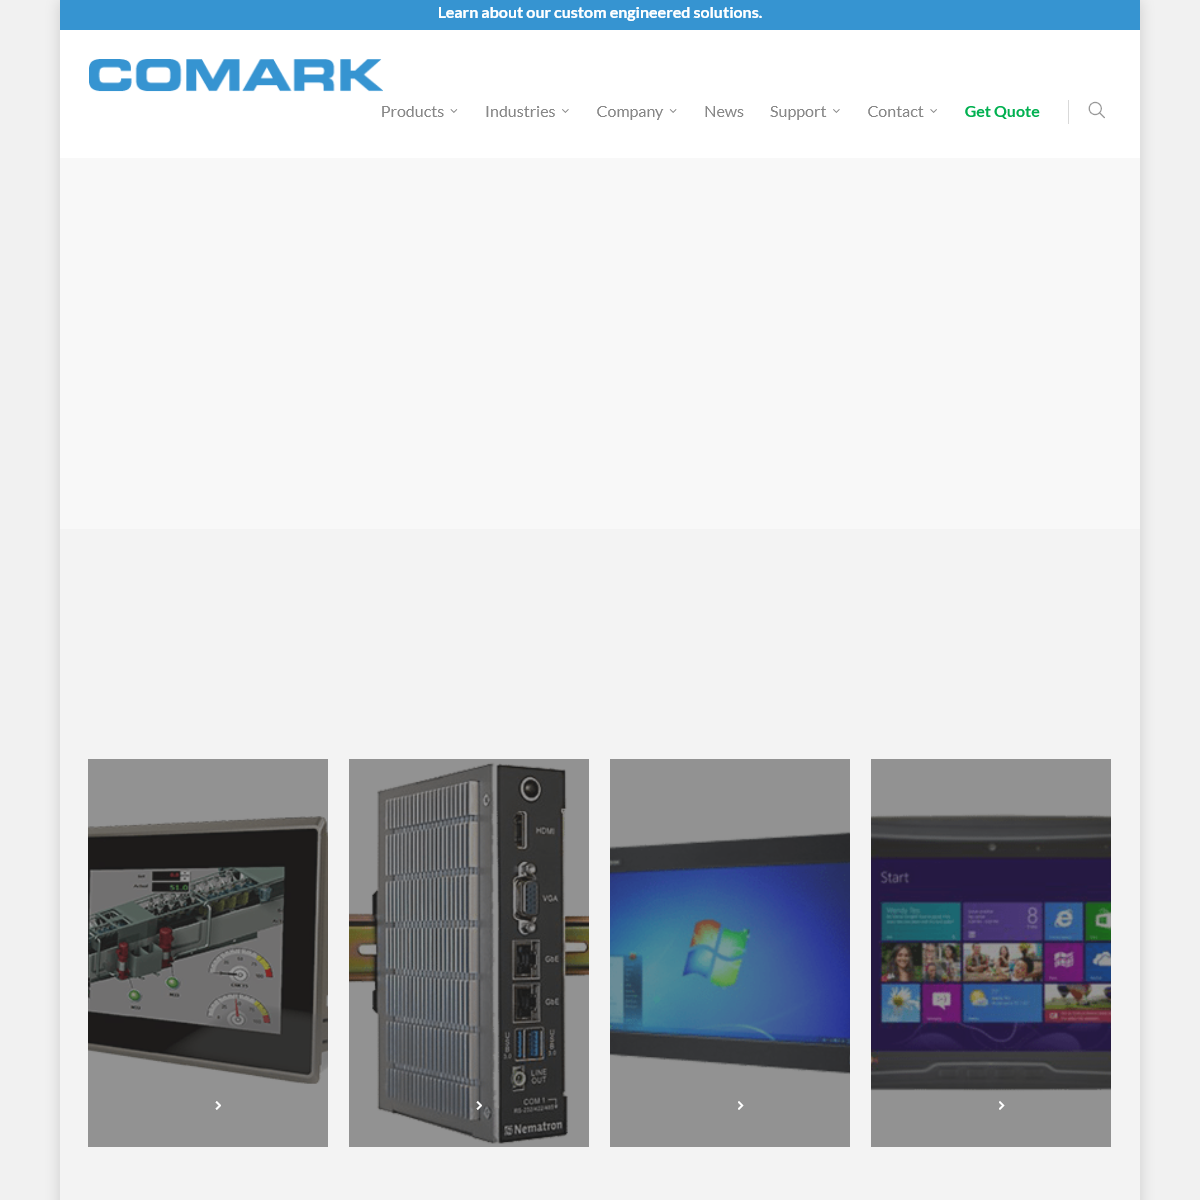 Comark Industrial computer & display solutions